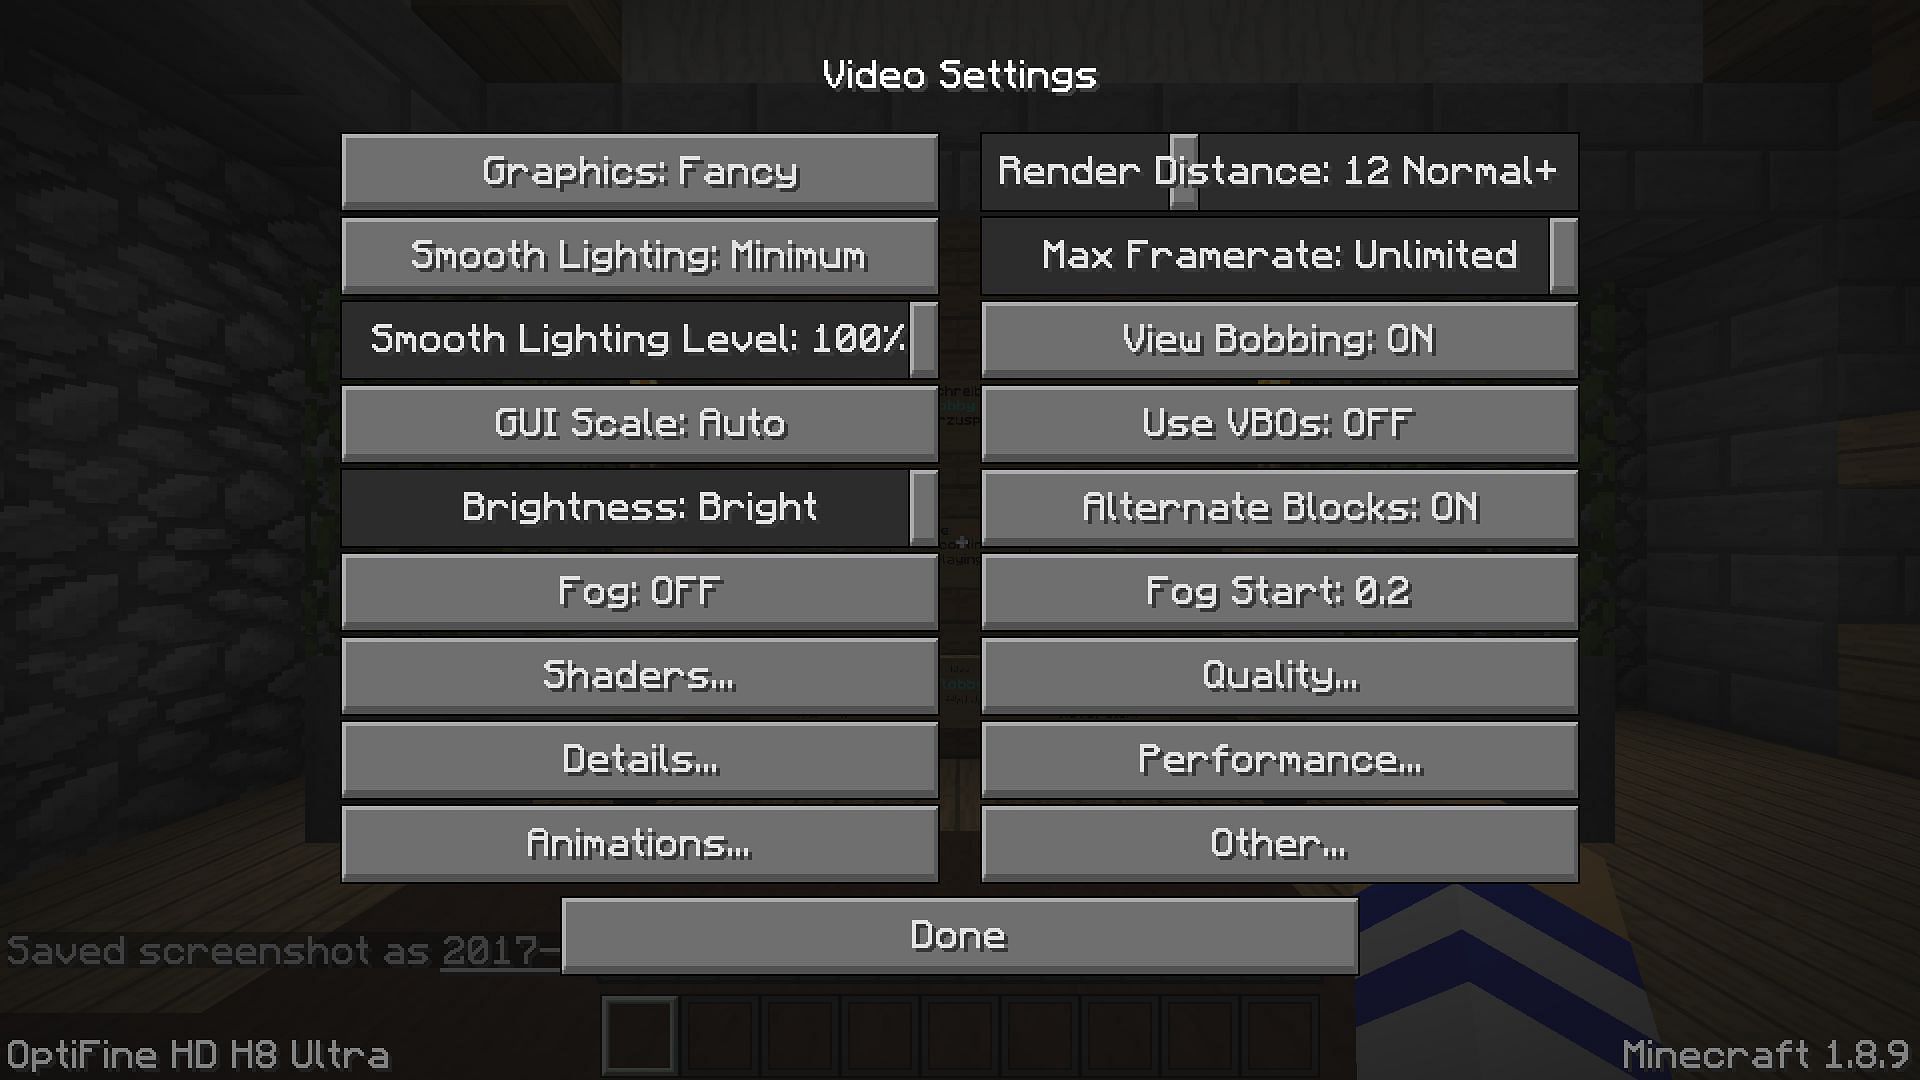 Settings can be changed to fully customize the experience (Image via Minecraft)